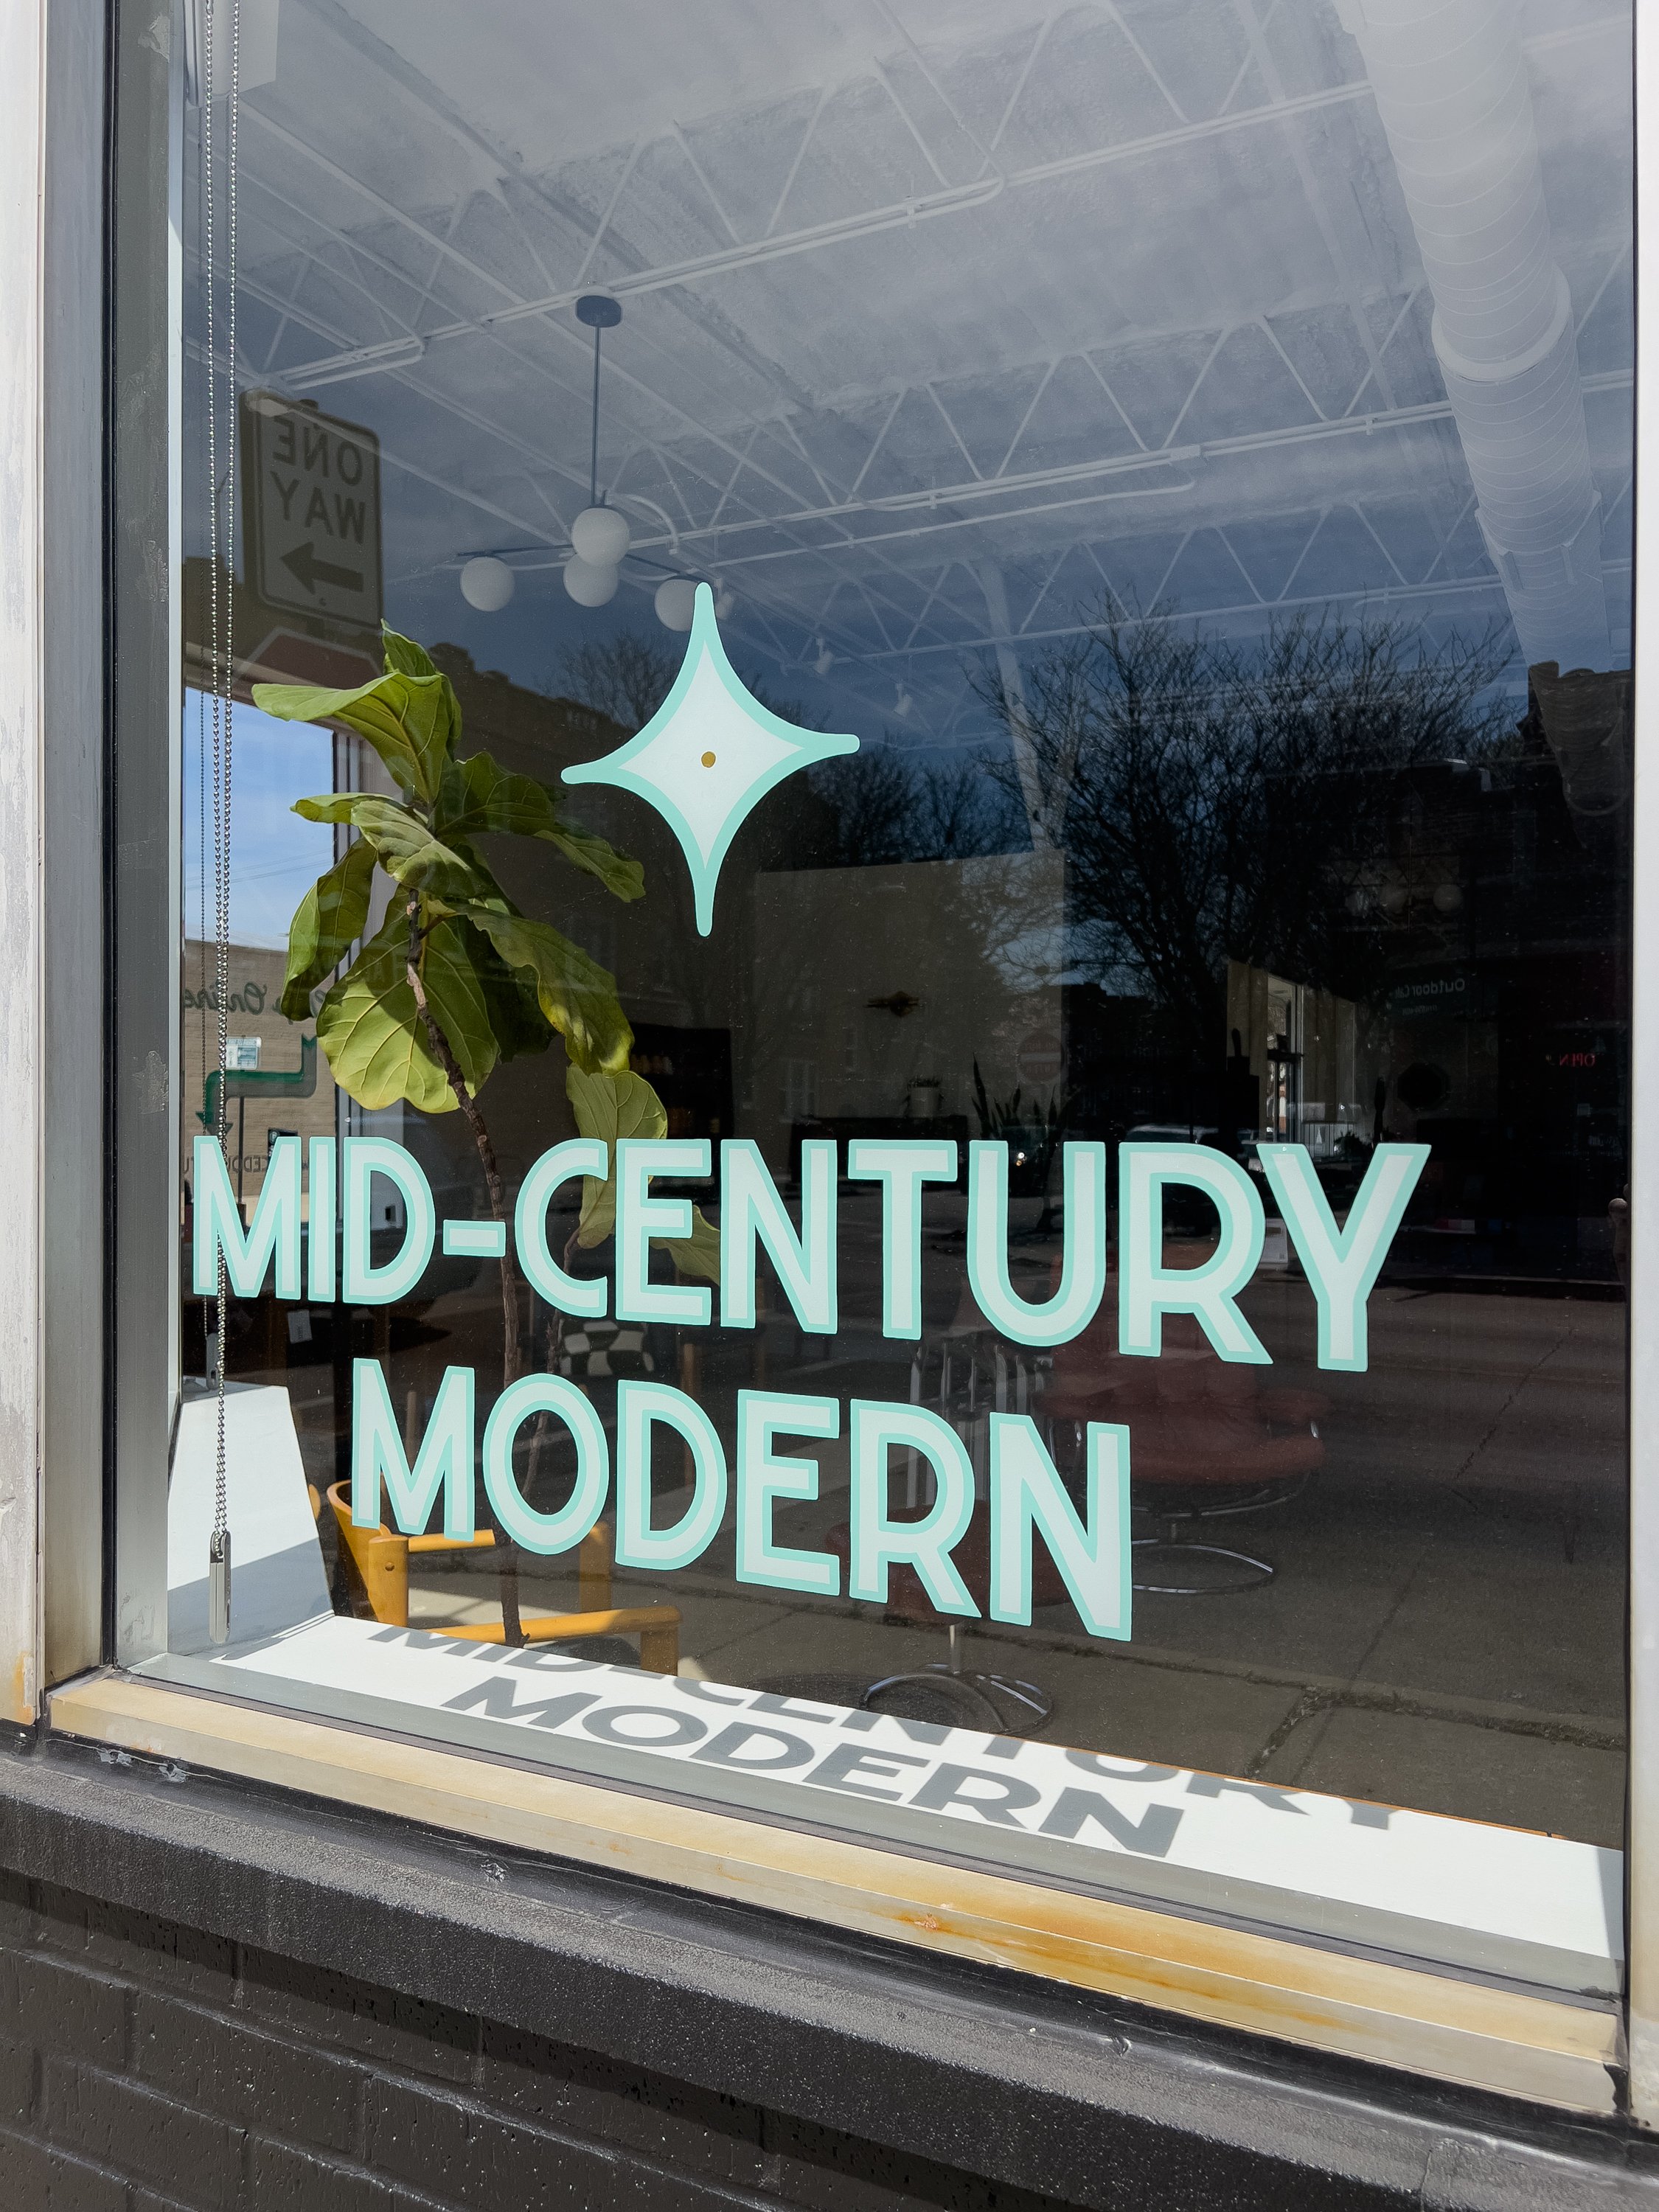 Sign Painting on Storefront Windows